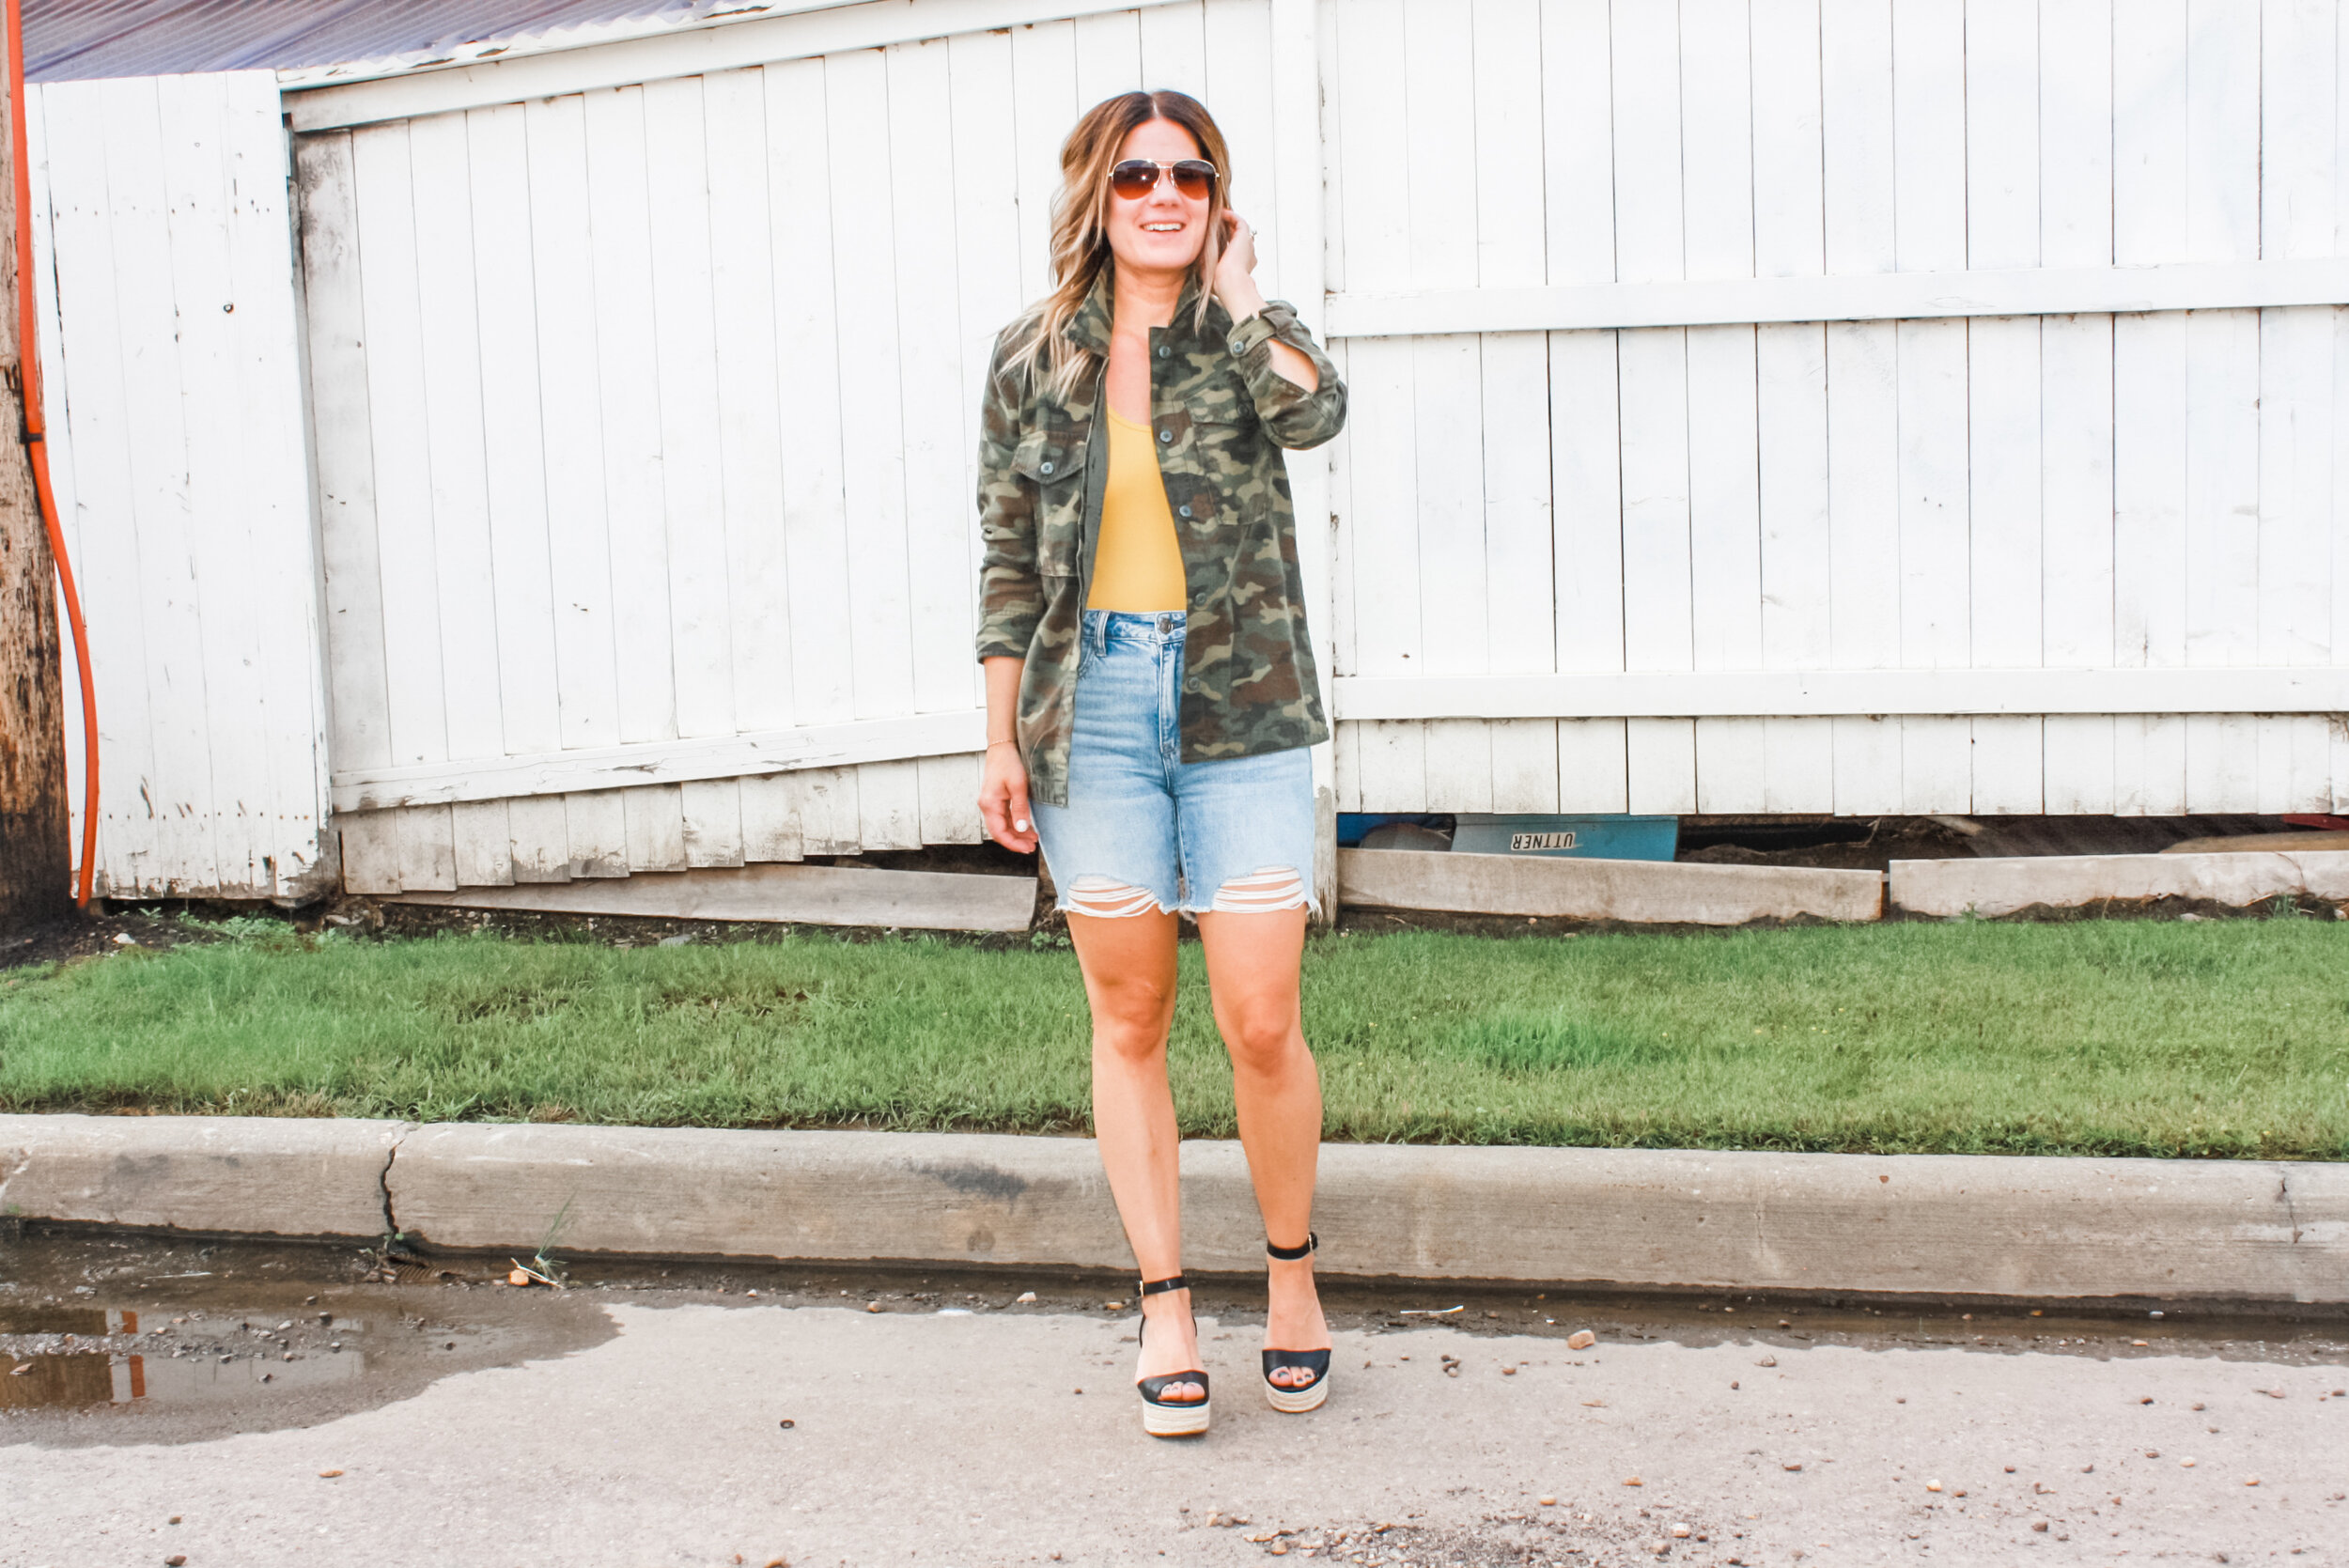  Canadians and mid-westerners are losing our opportunity to wear shorts as fall creeps closer and closer but, this look is an awesome inspiration for all of you who can wear shorts into October. The mustard yellow bodysuit is featured here again. I l